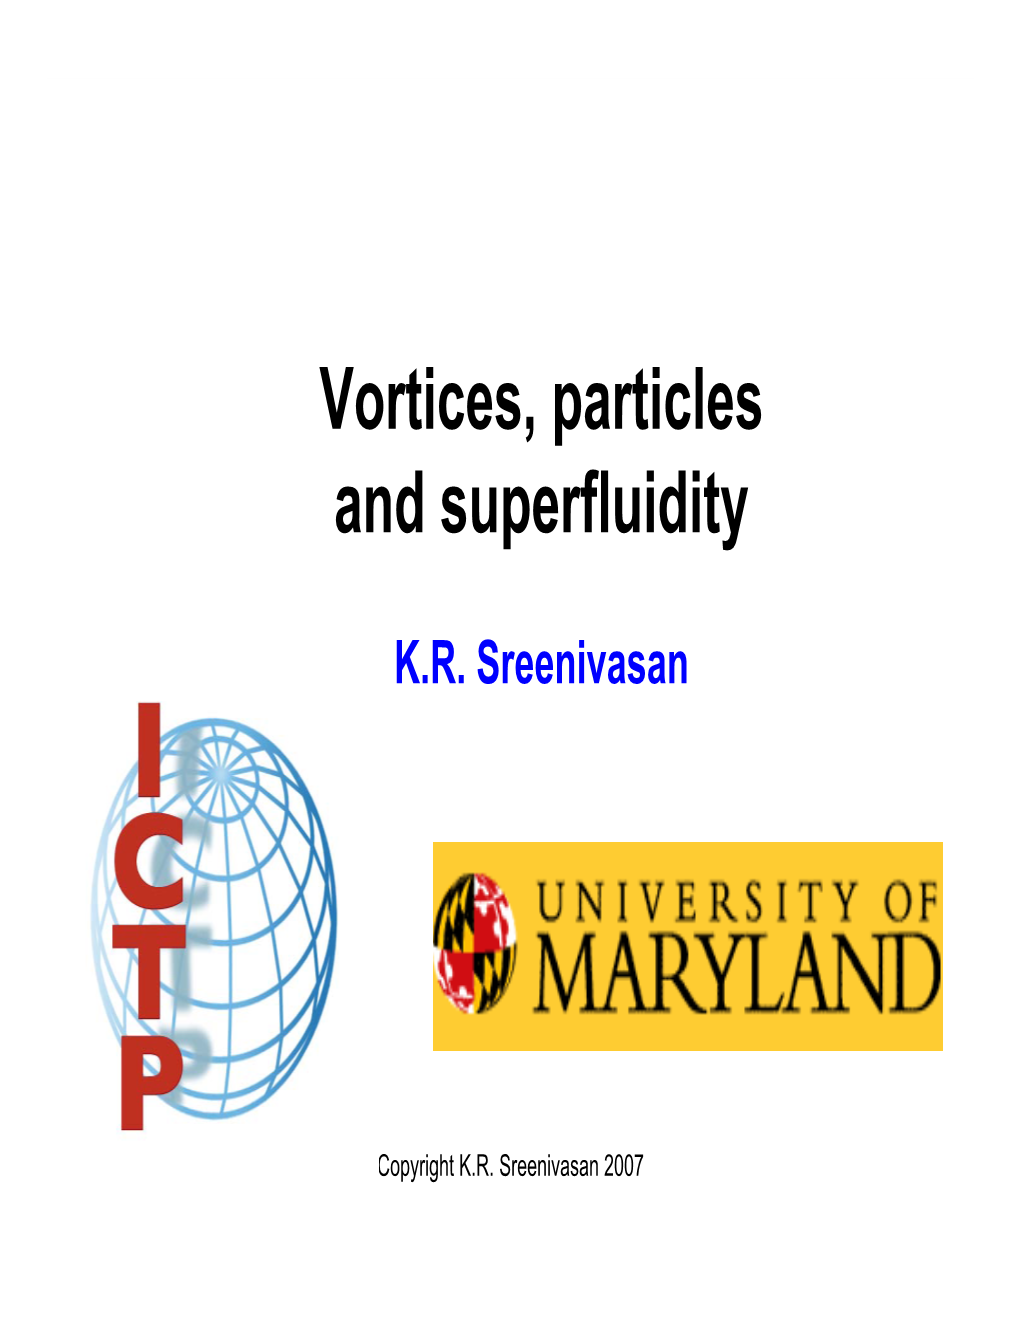 Vortices, Particles and Superfluidity